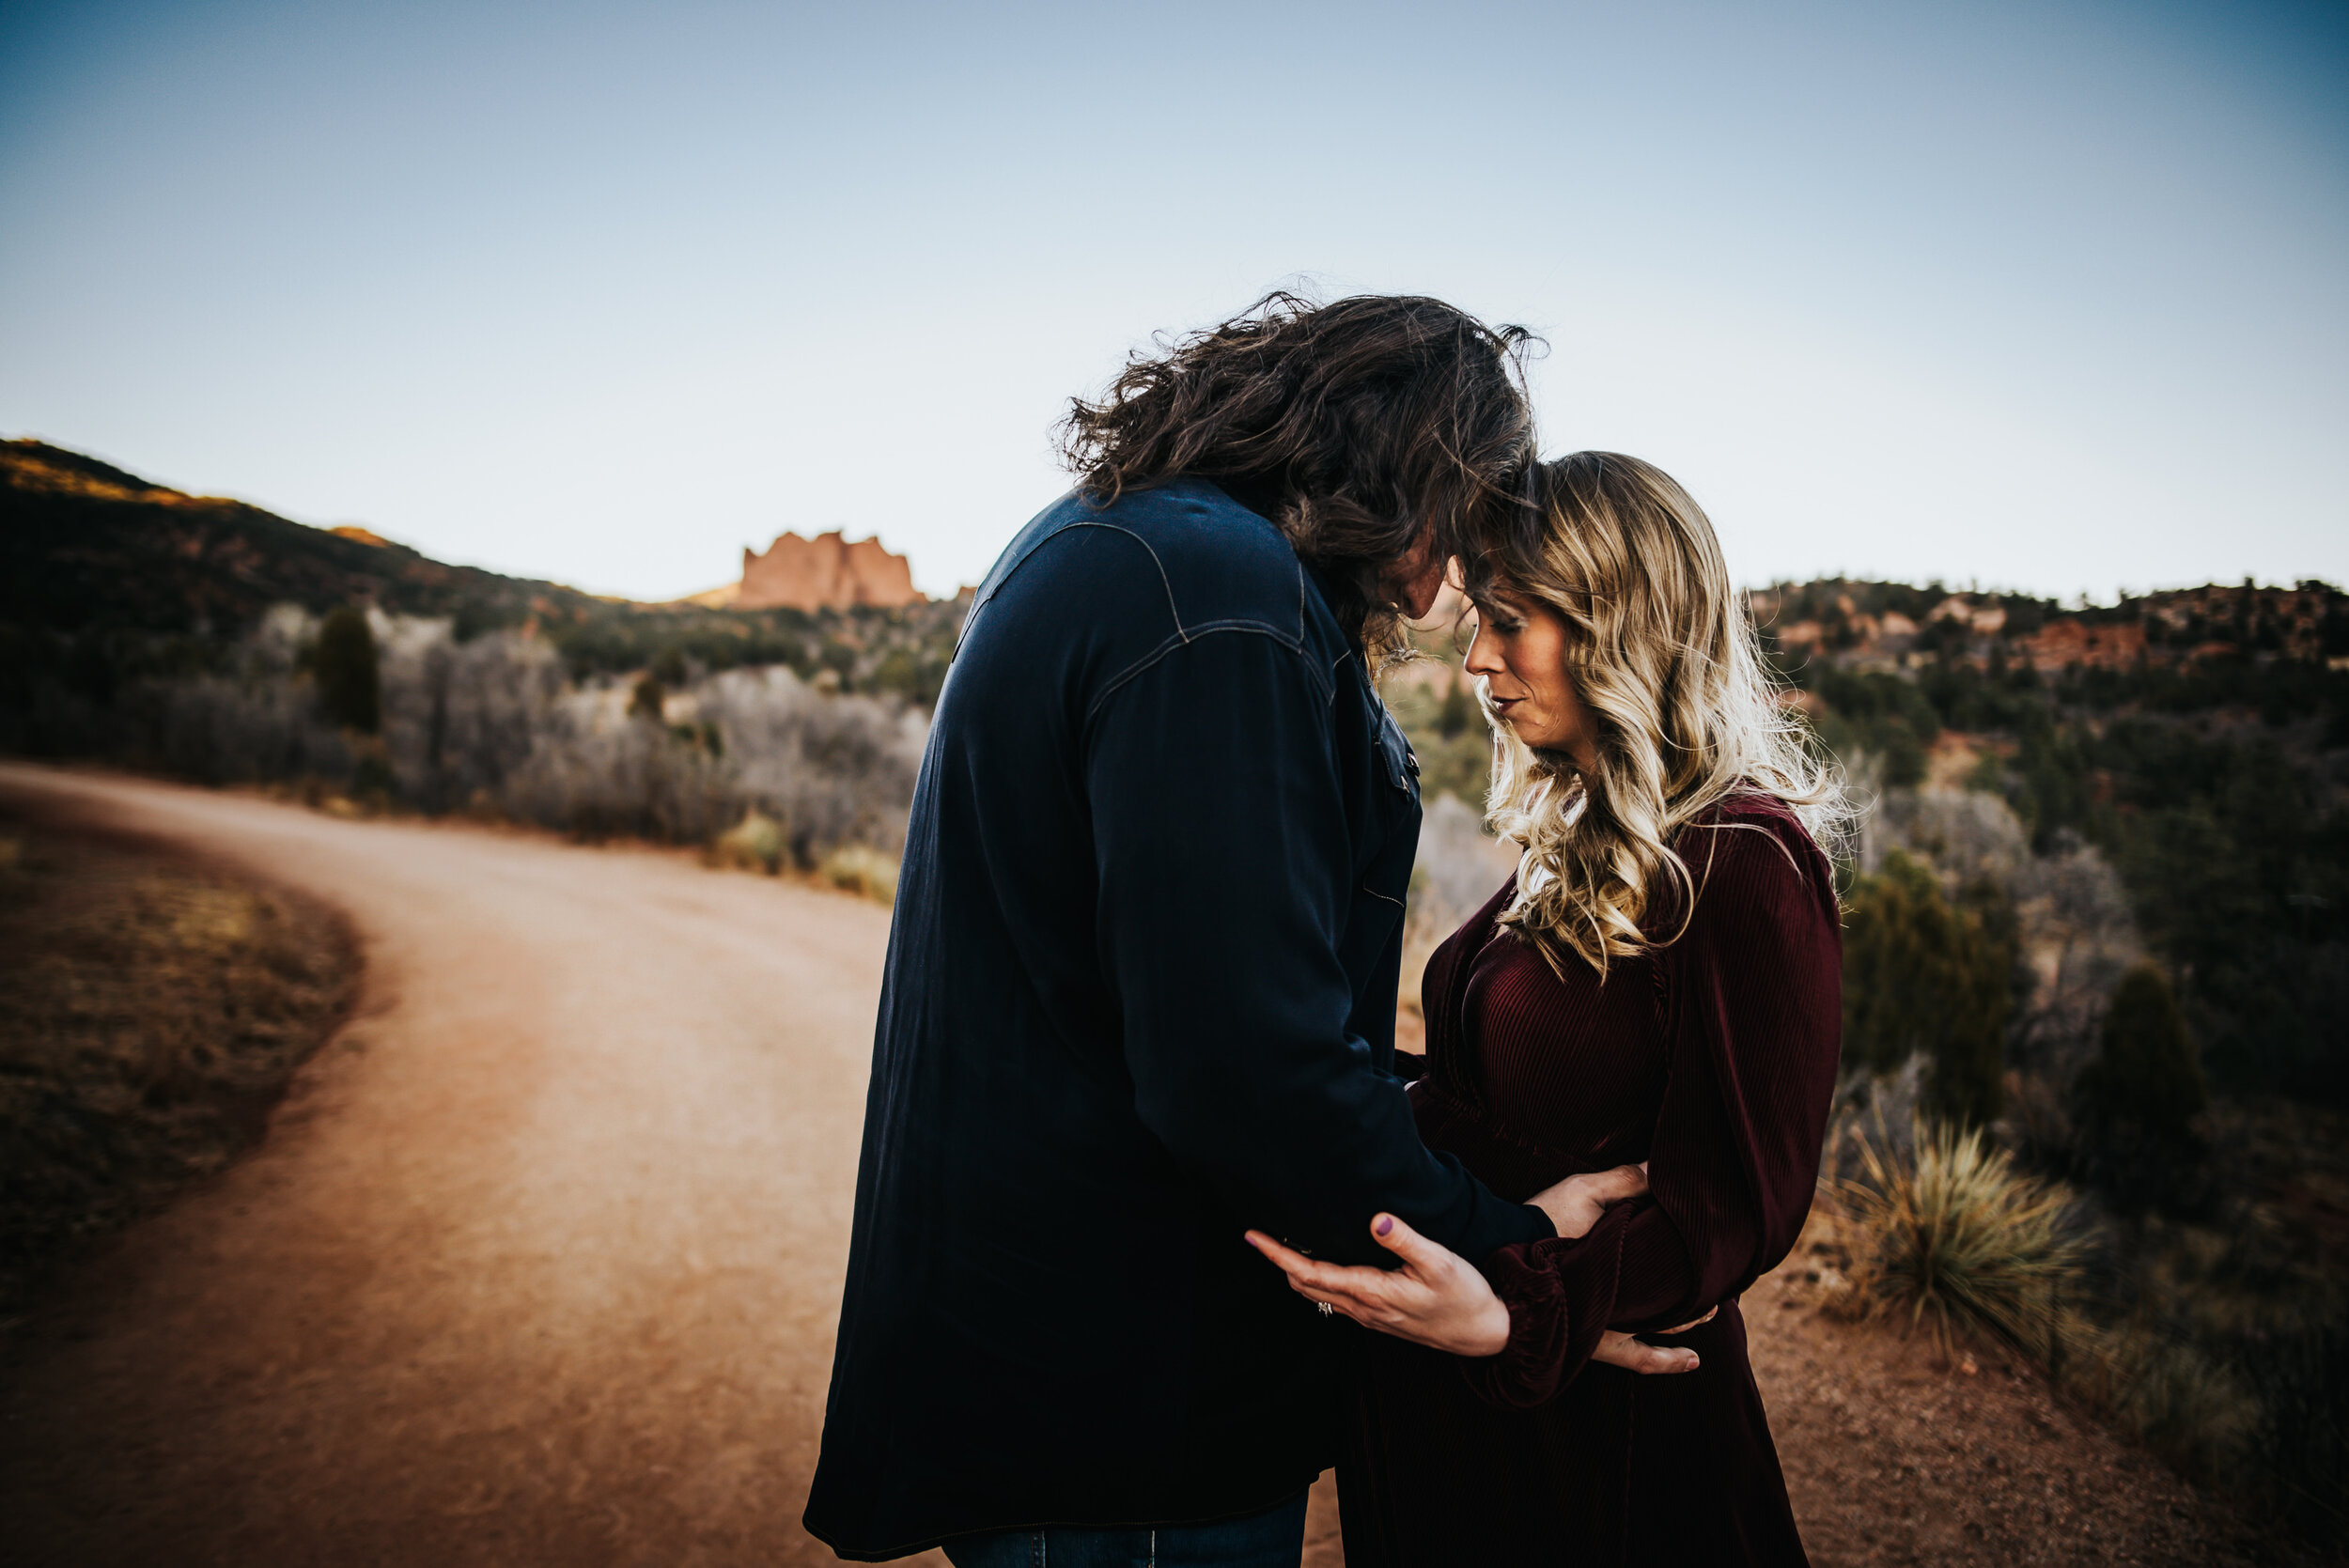 Laura Maternity Session Colorado Springs Sunset Garden of the Gods Husband Wife Wild Prairie Photography-8-2021.jpg